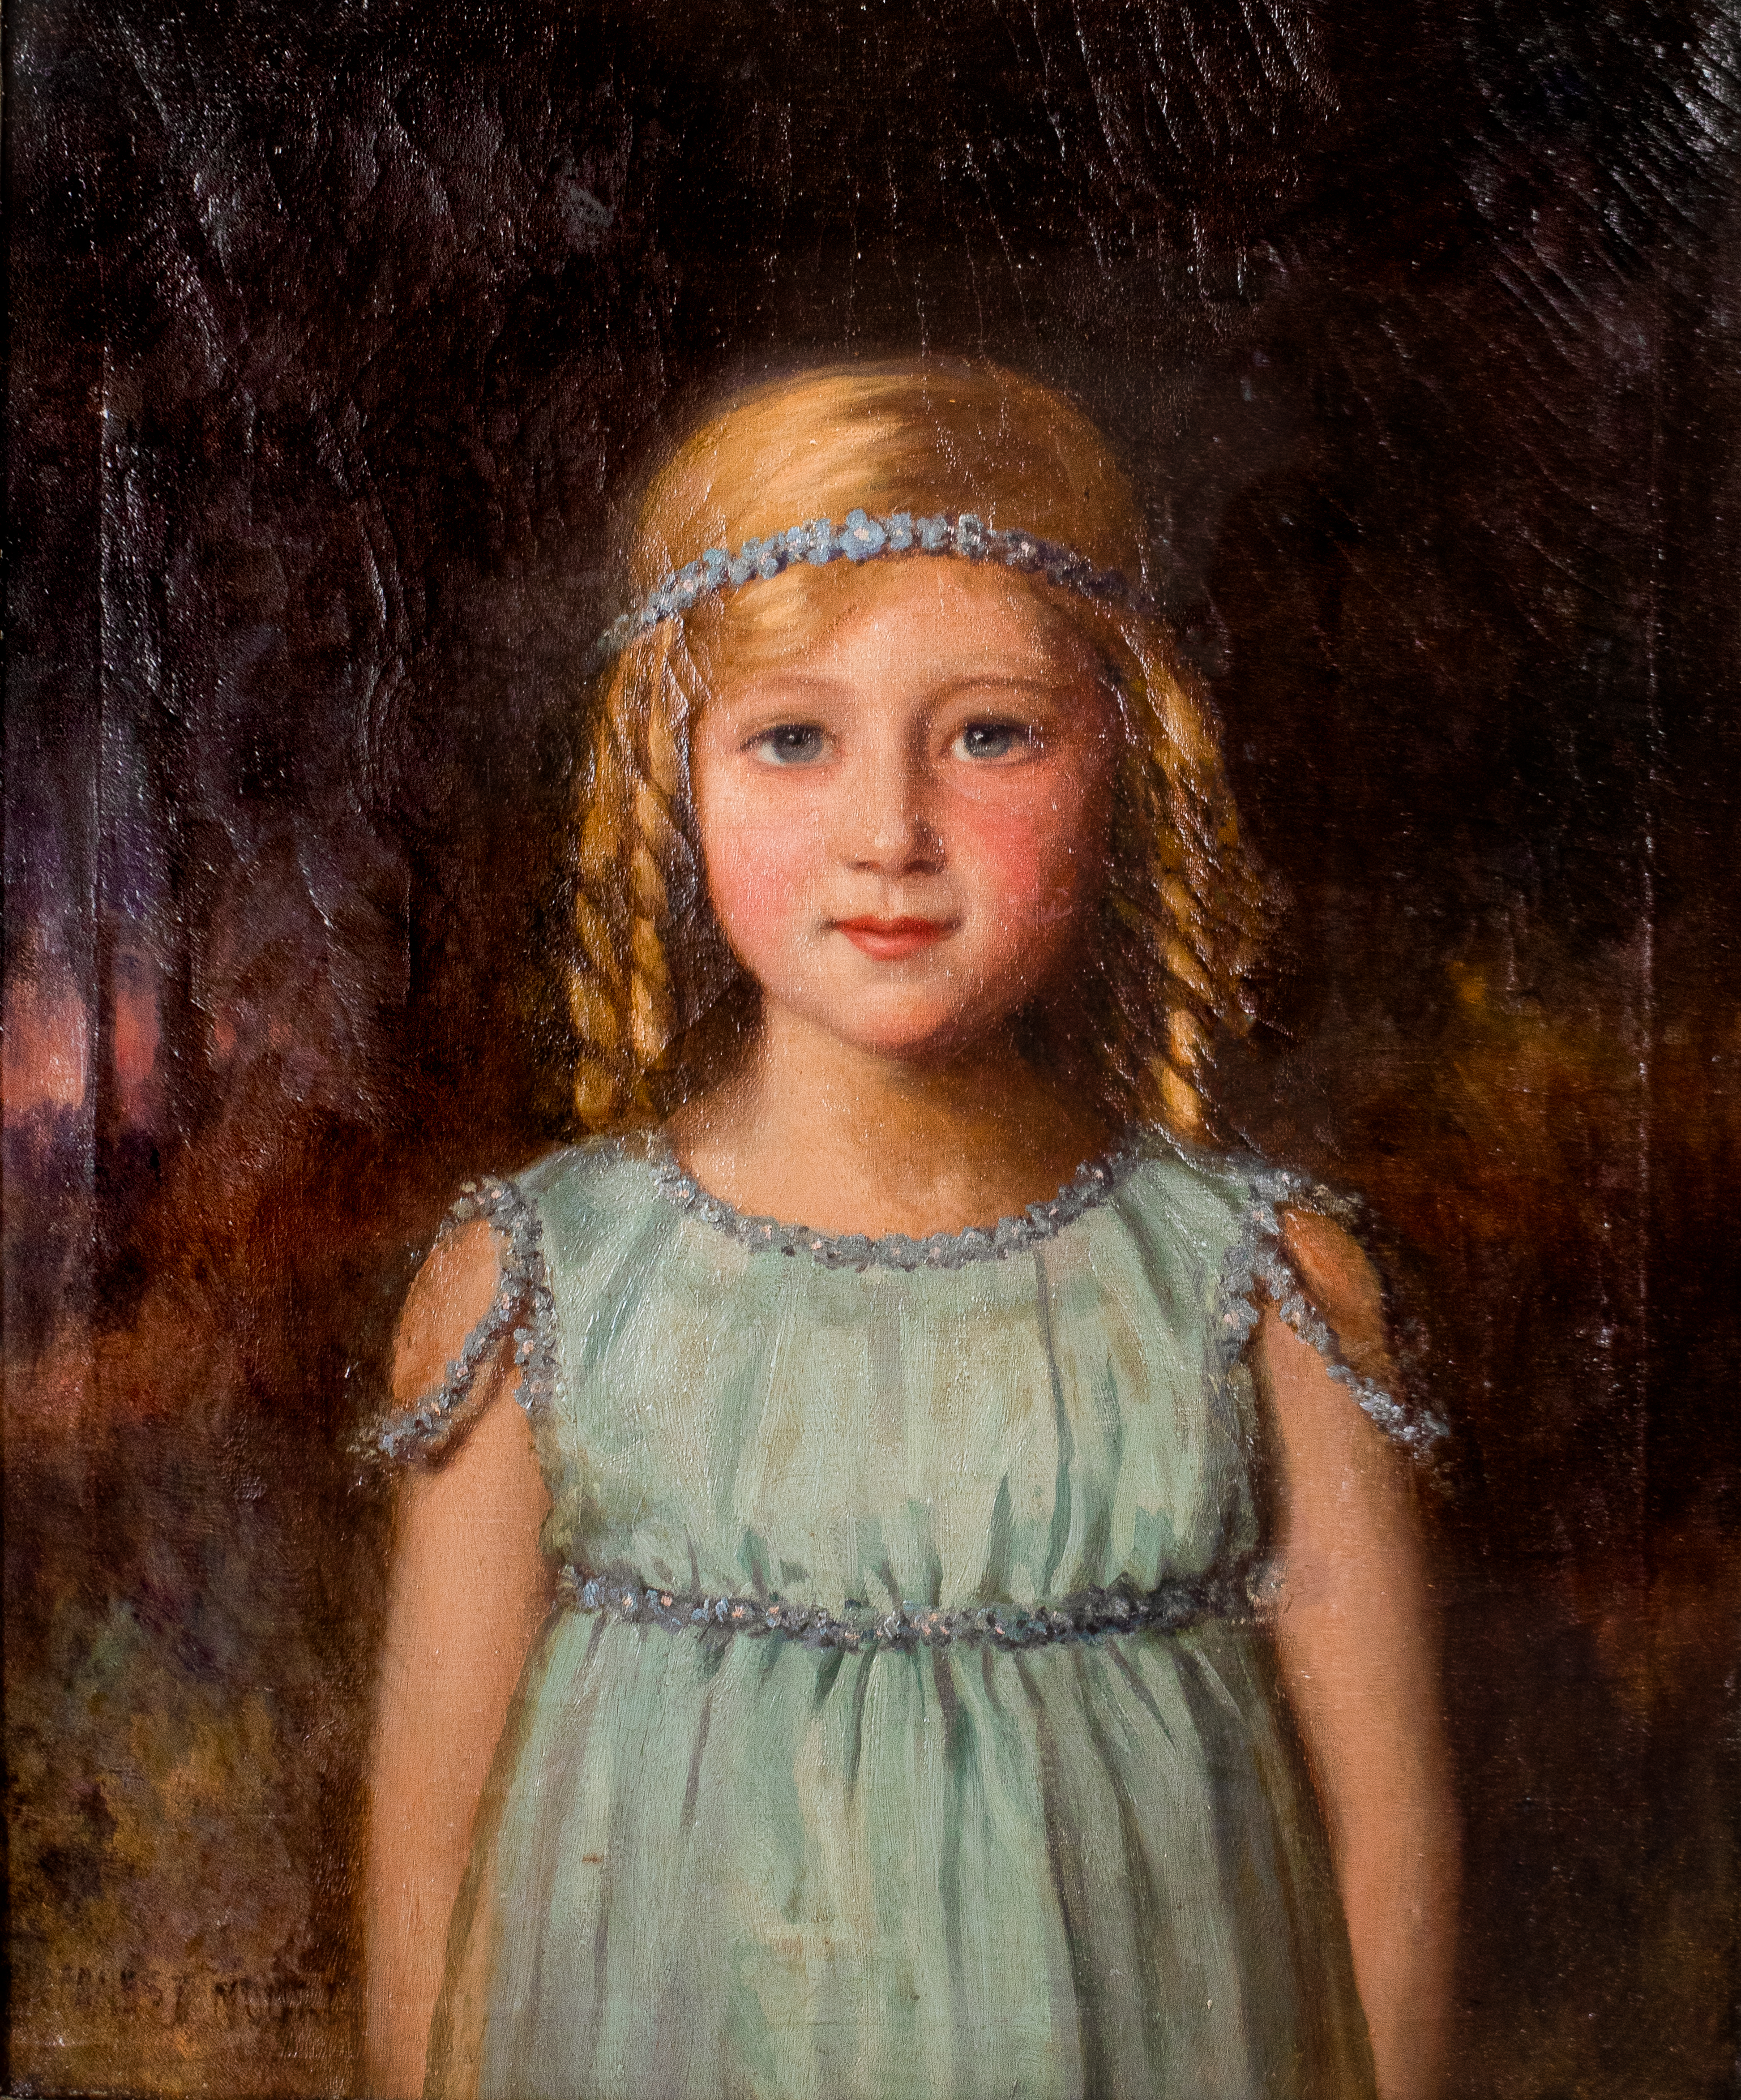 ERNEST MOORE GIRL IN A BLUE DRESS